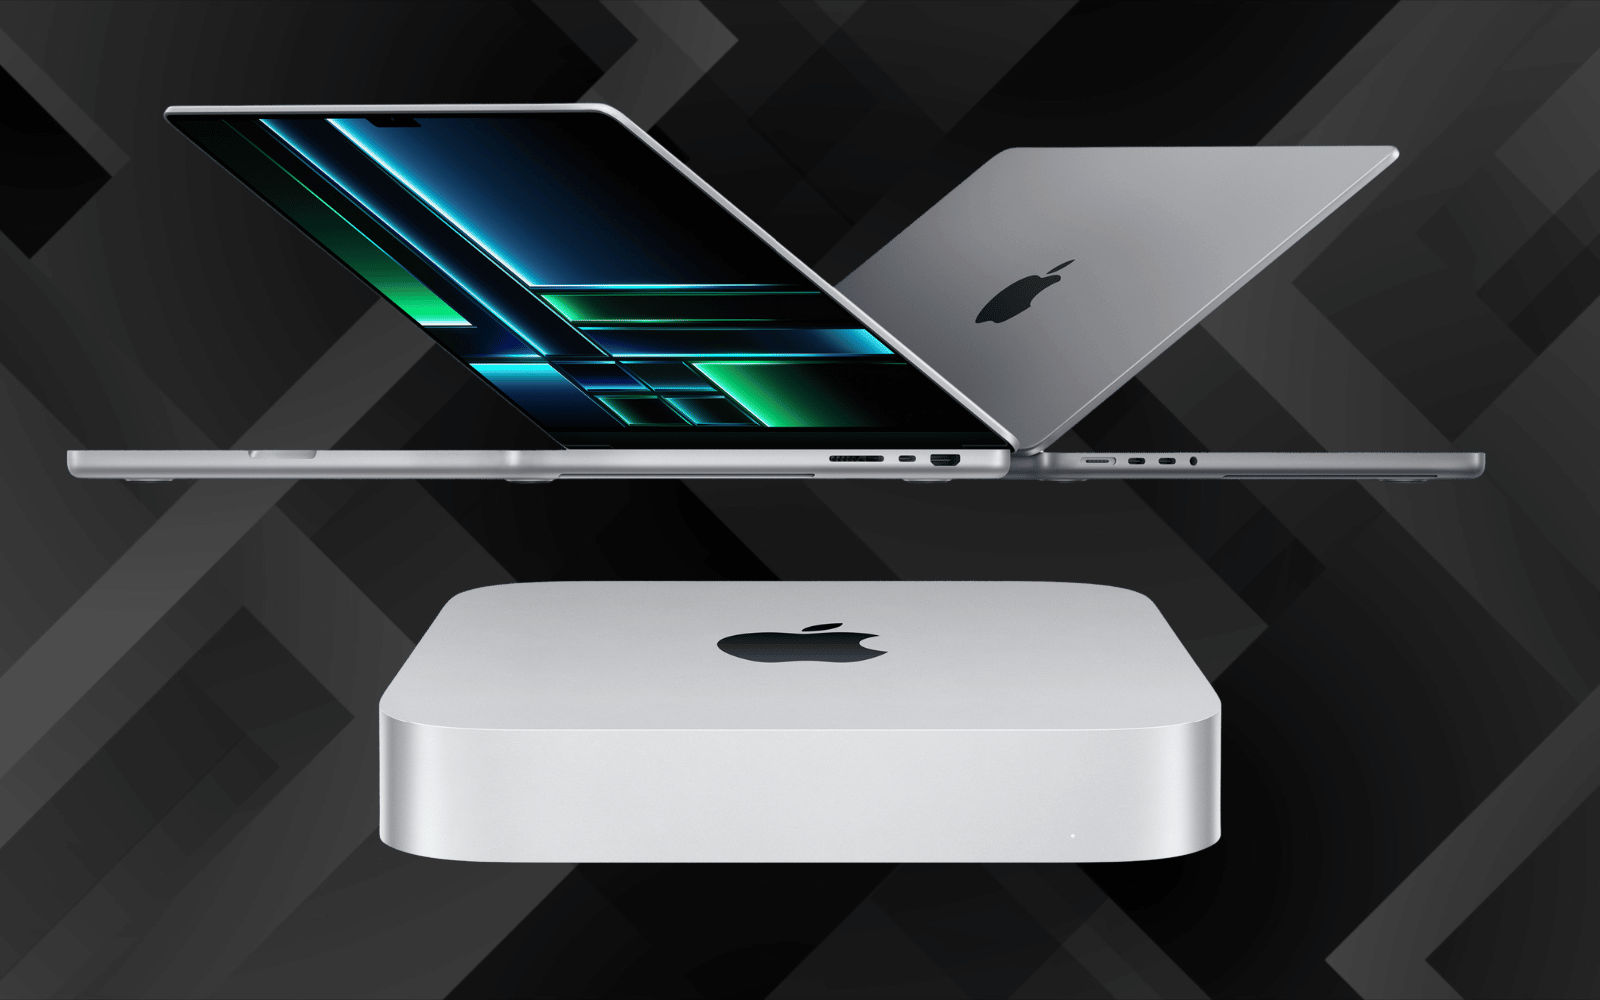 Pre Orders And Prices Are Now Available For Apple's New M2 MacBooks And Mac Minis